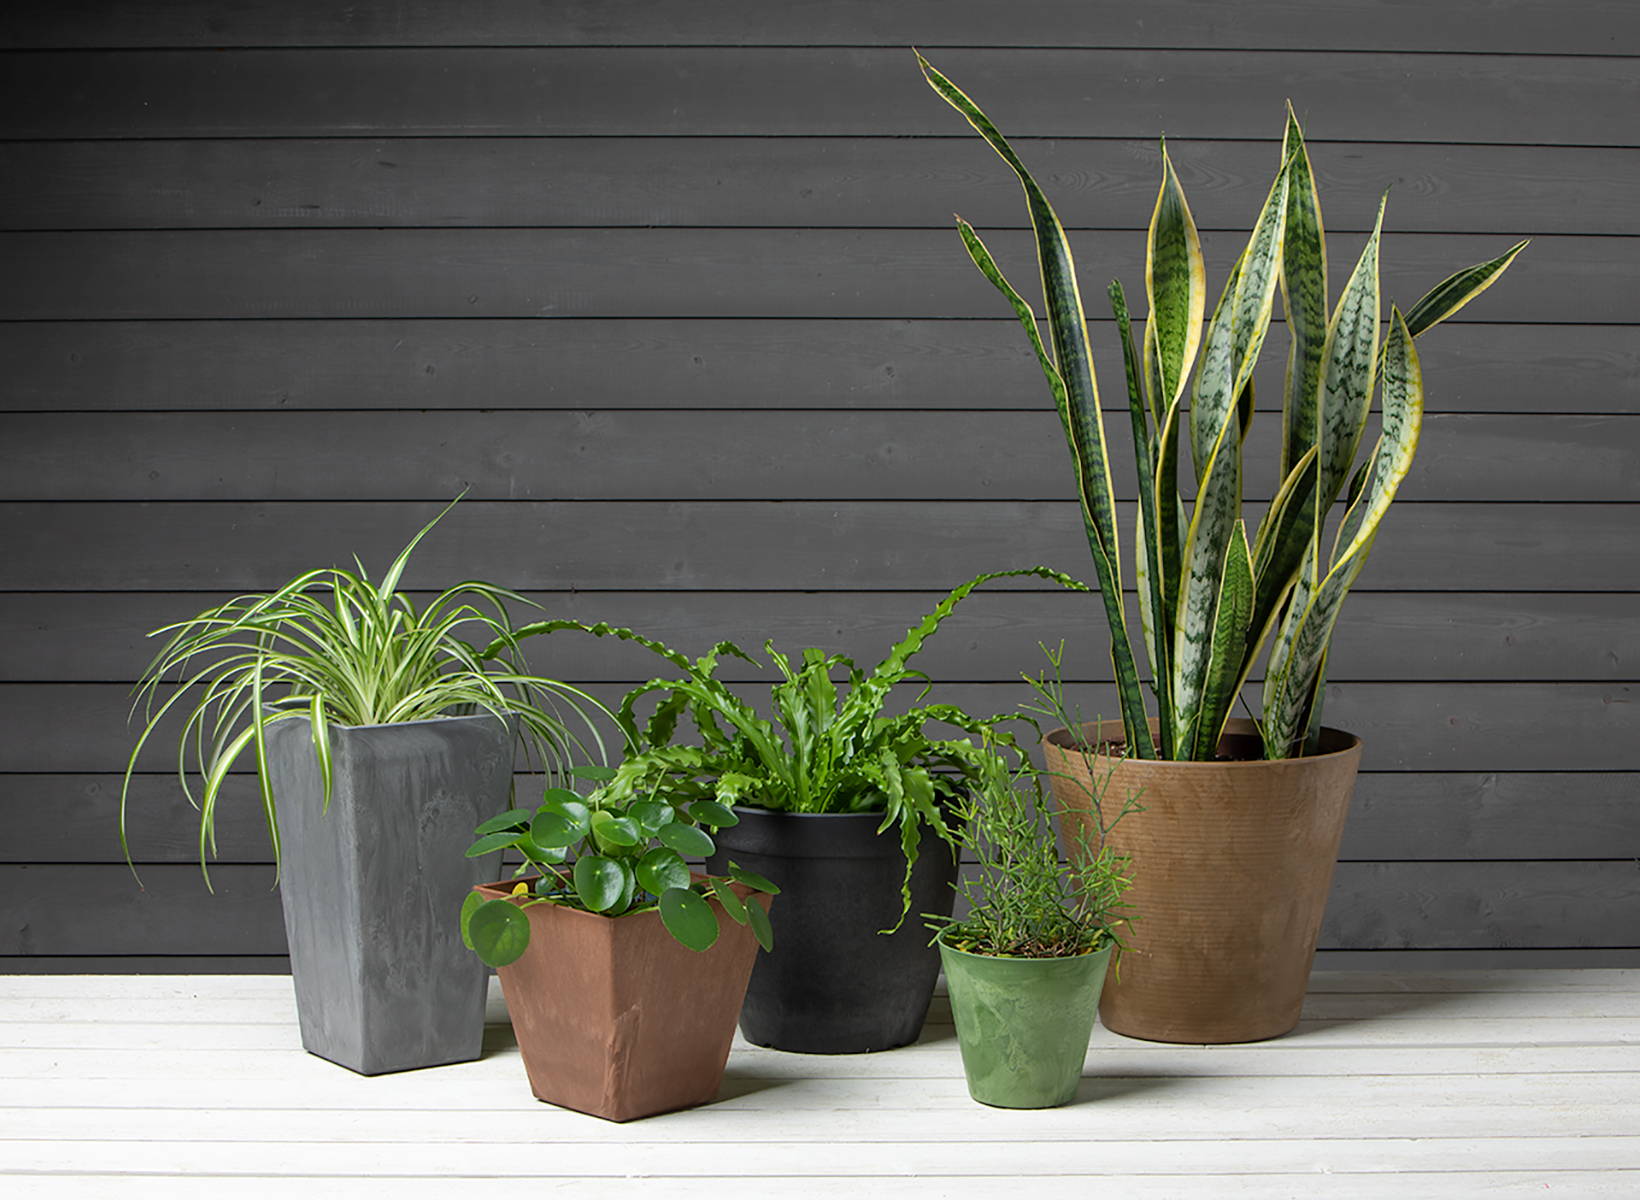 Plants growing in different styles of Artstone planters, including Ella Tall planter, Ella Square planter, Dolce round planter, Cali Round planter, and a Napa Round planter